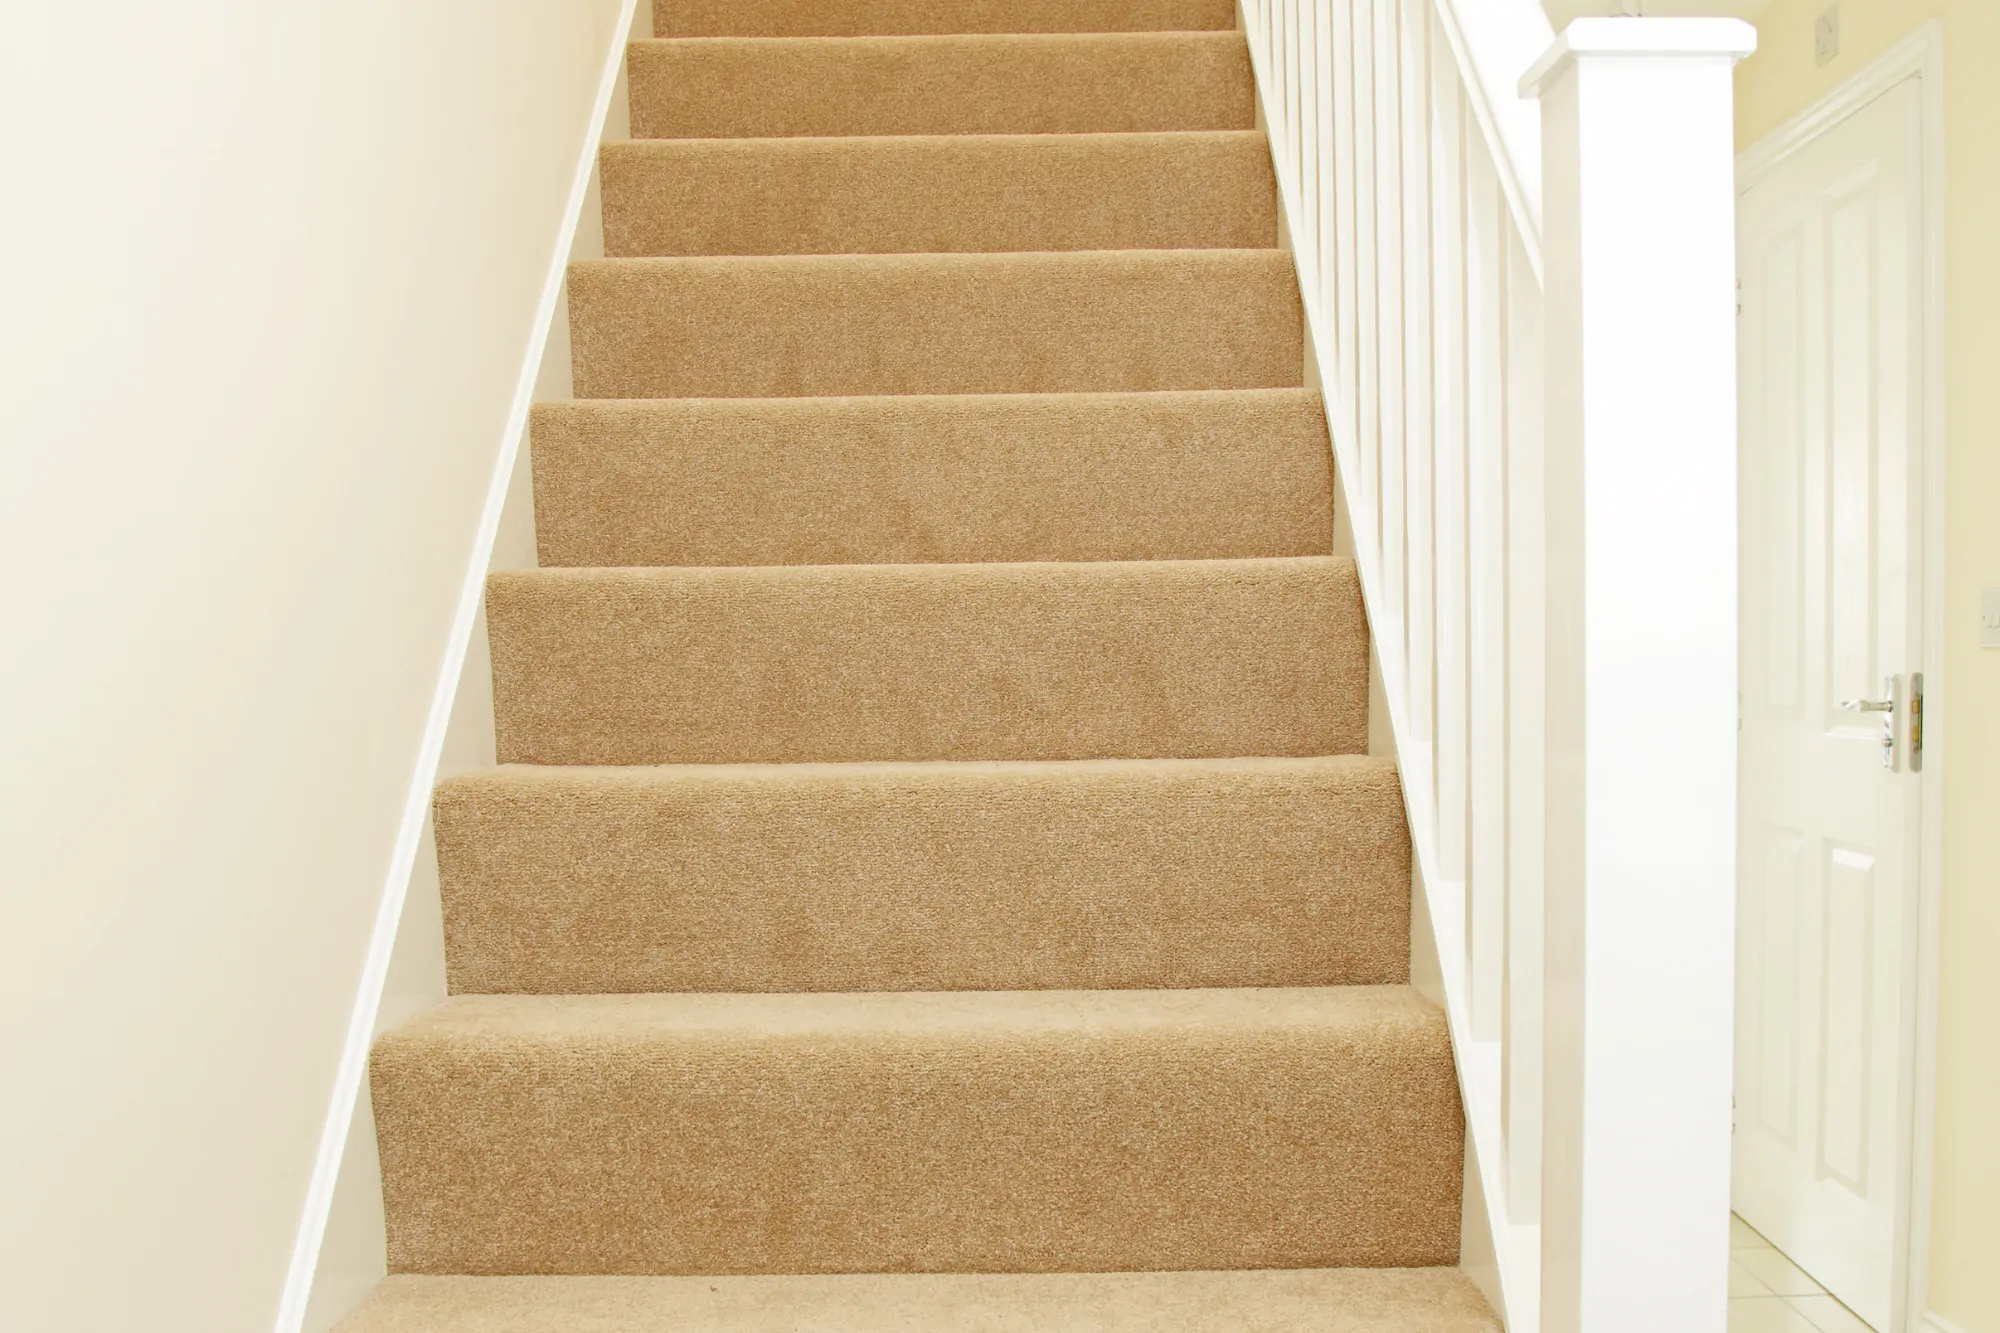 Fitting Carpet Underlay on Stairs